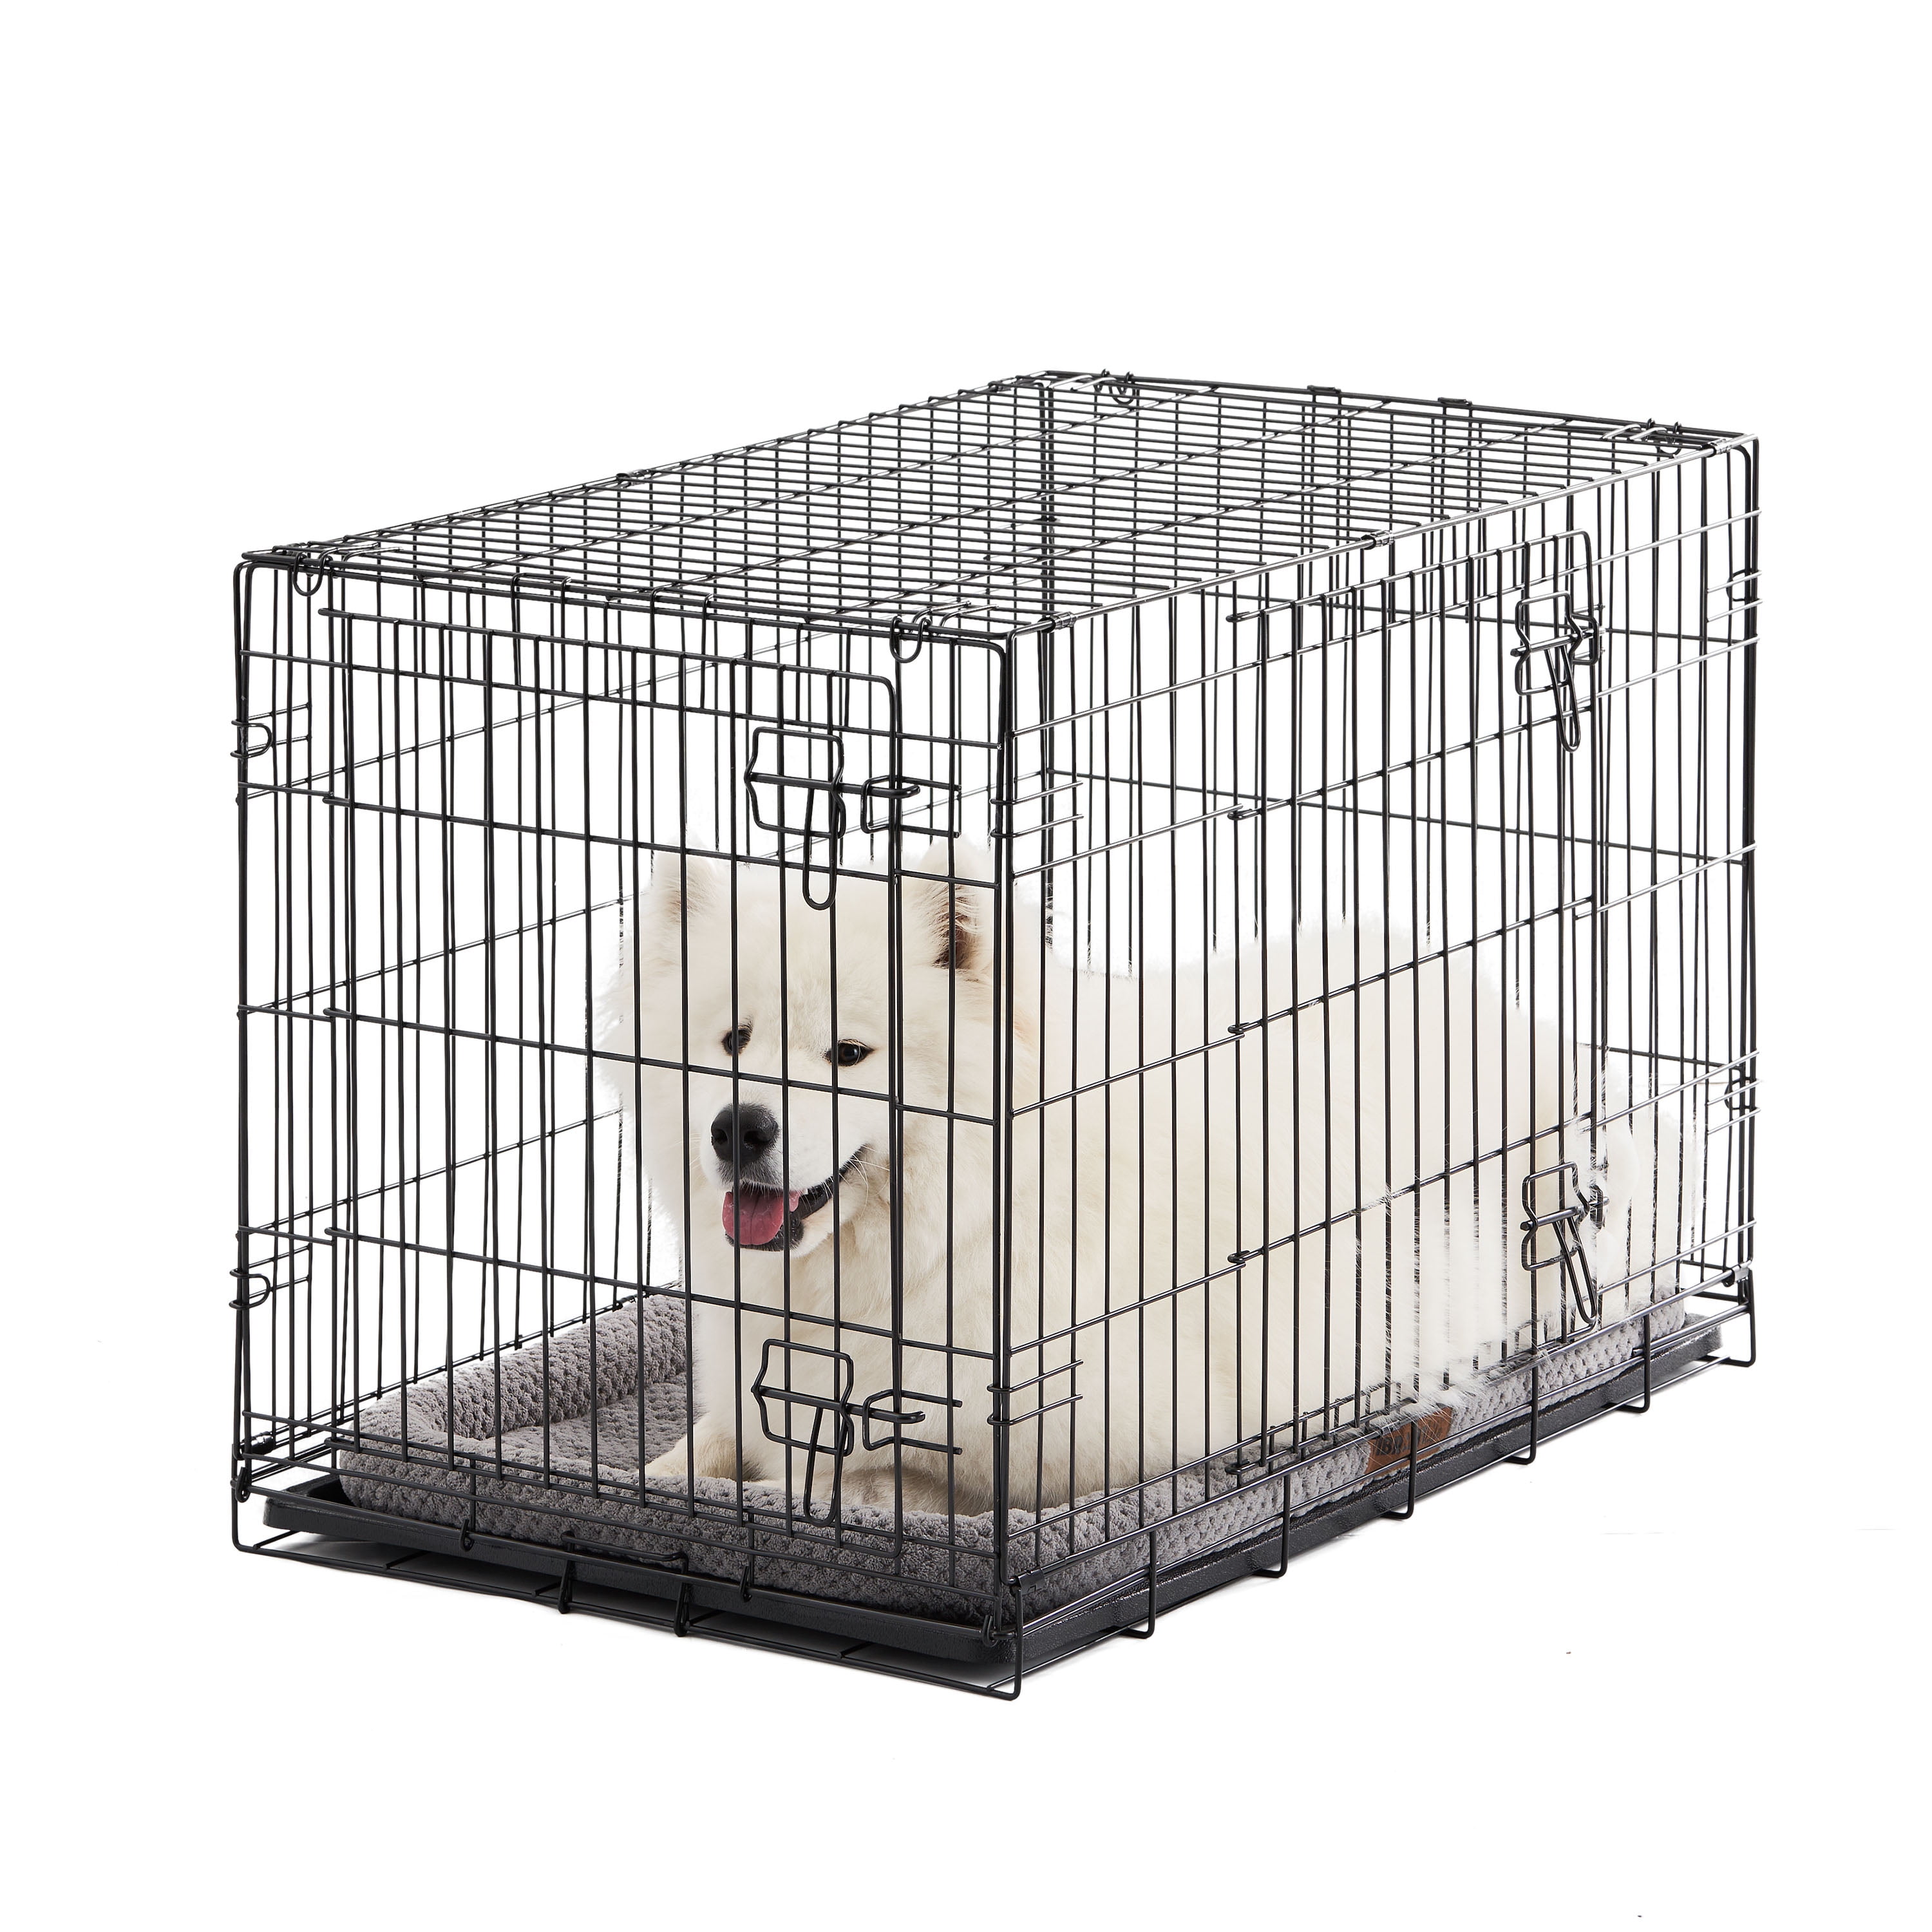 how long is too long to crate a dog